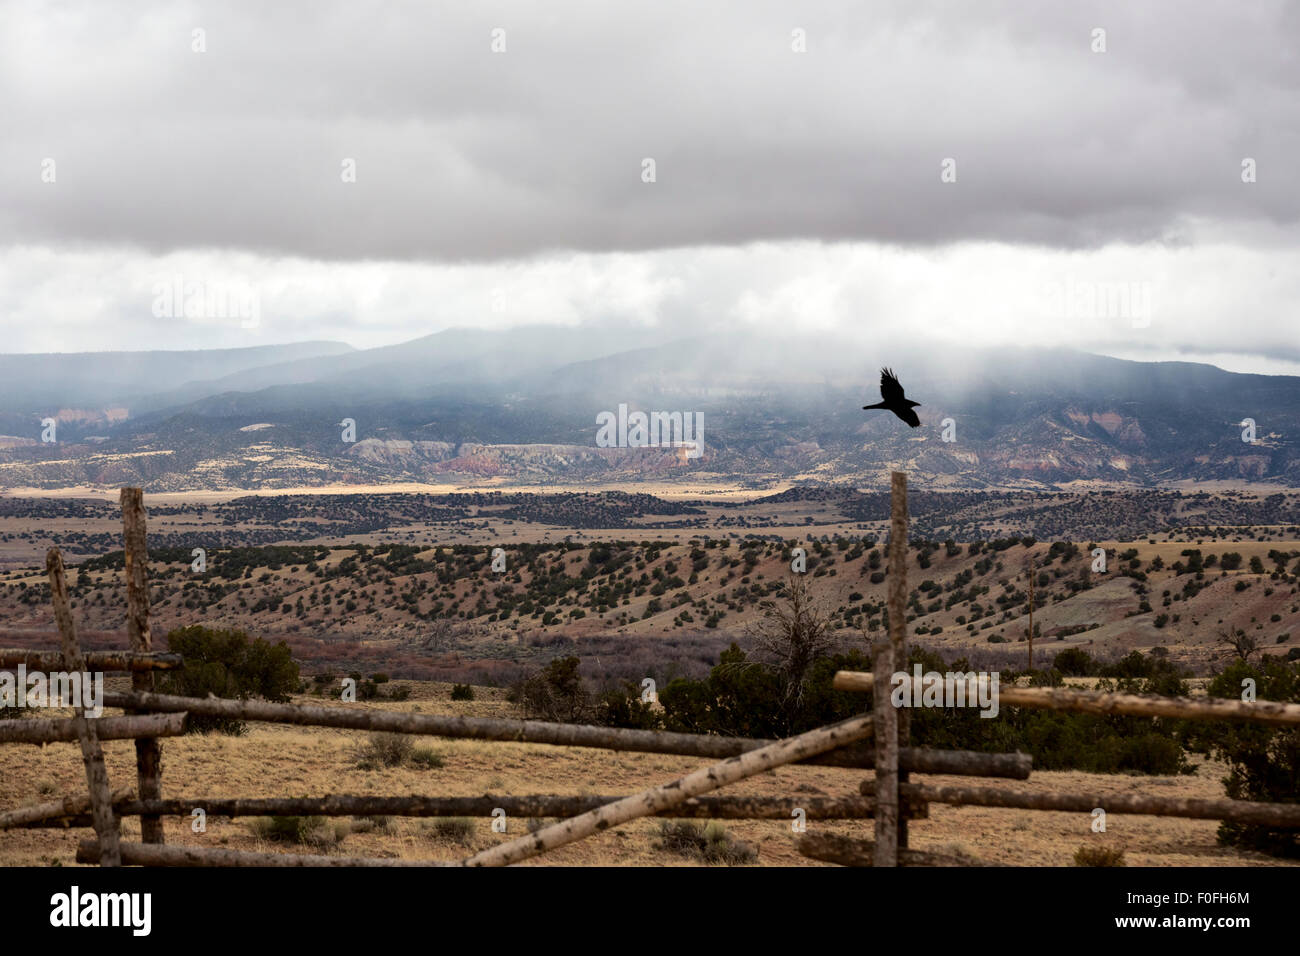 Foreground fence partially frames a dramatic Southwestern scene with colorful hills and a raven flying out of the frame. Stock Photo